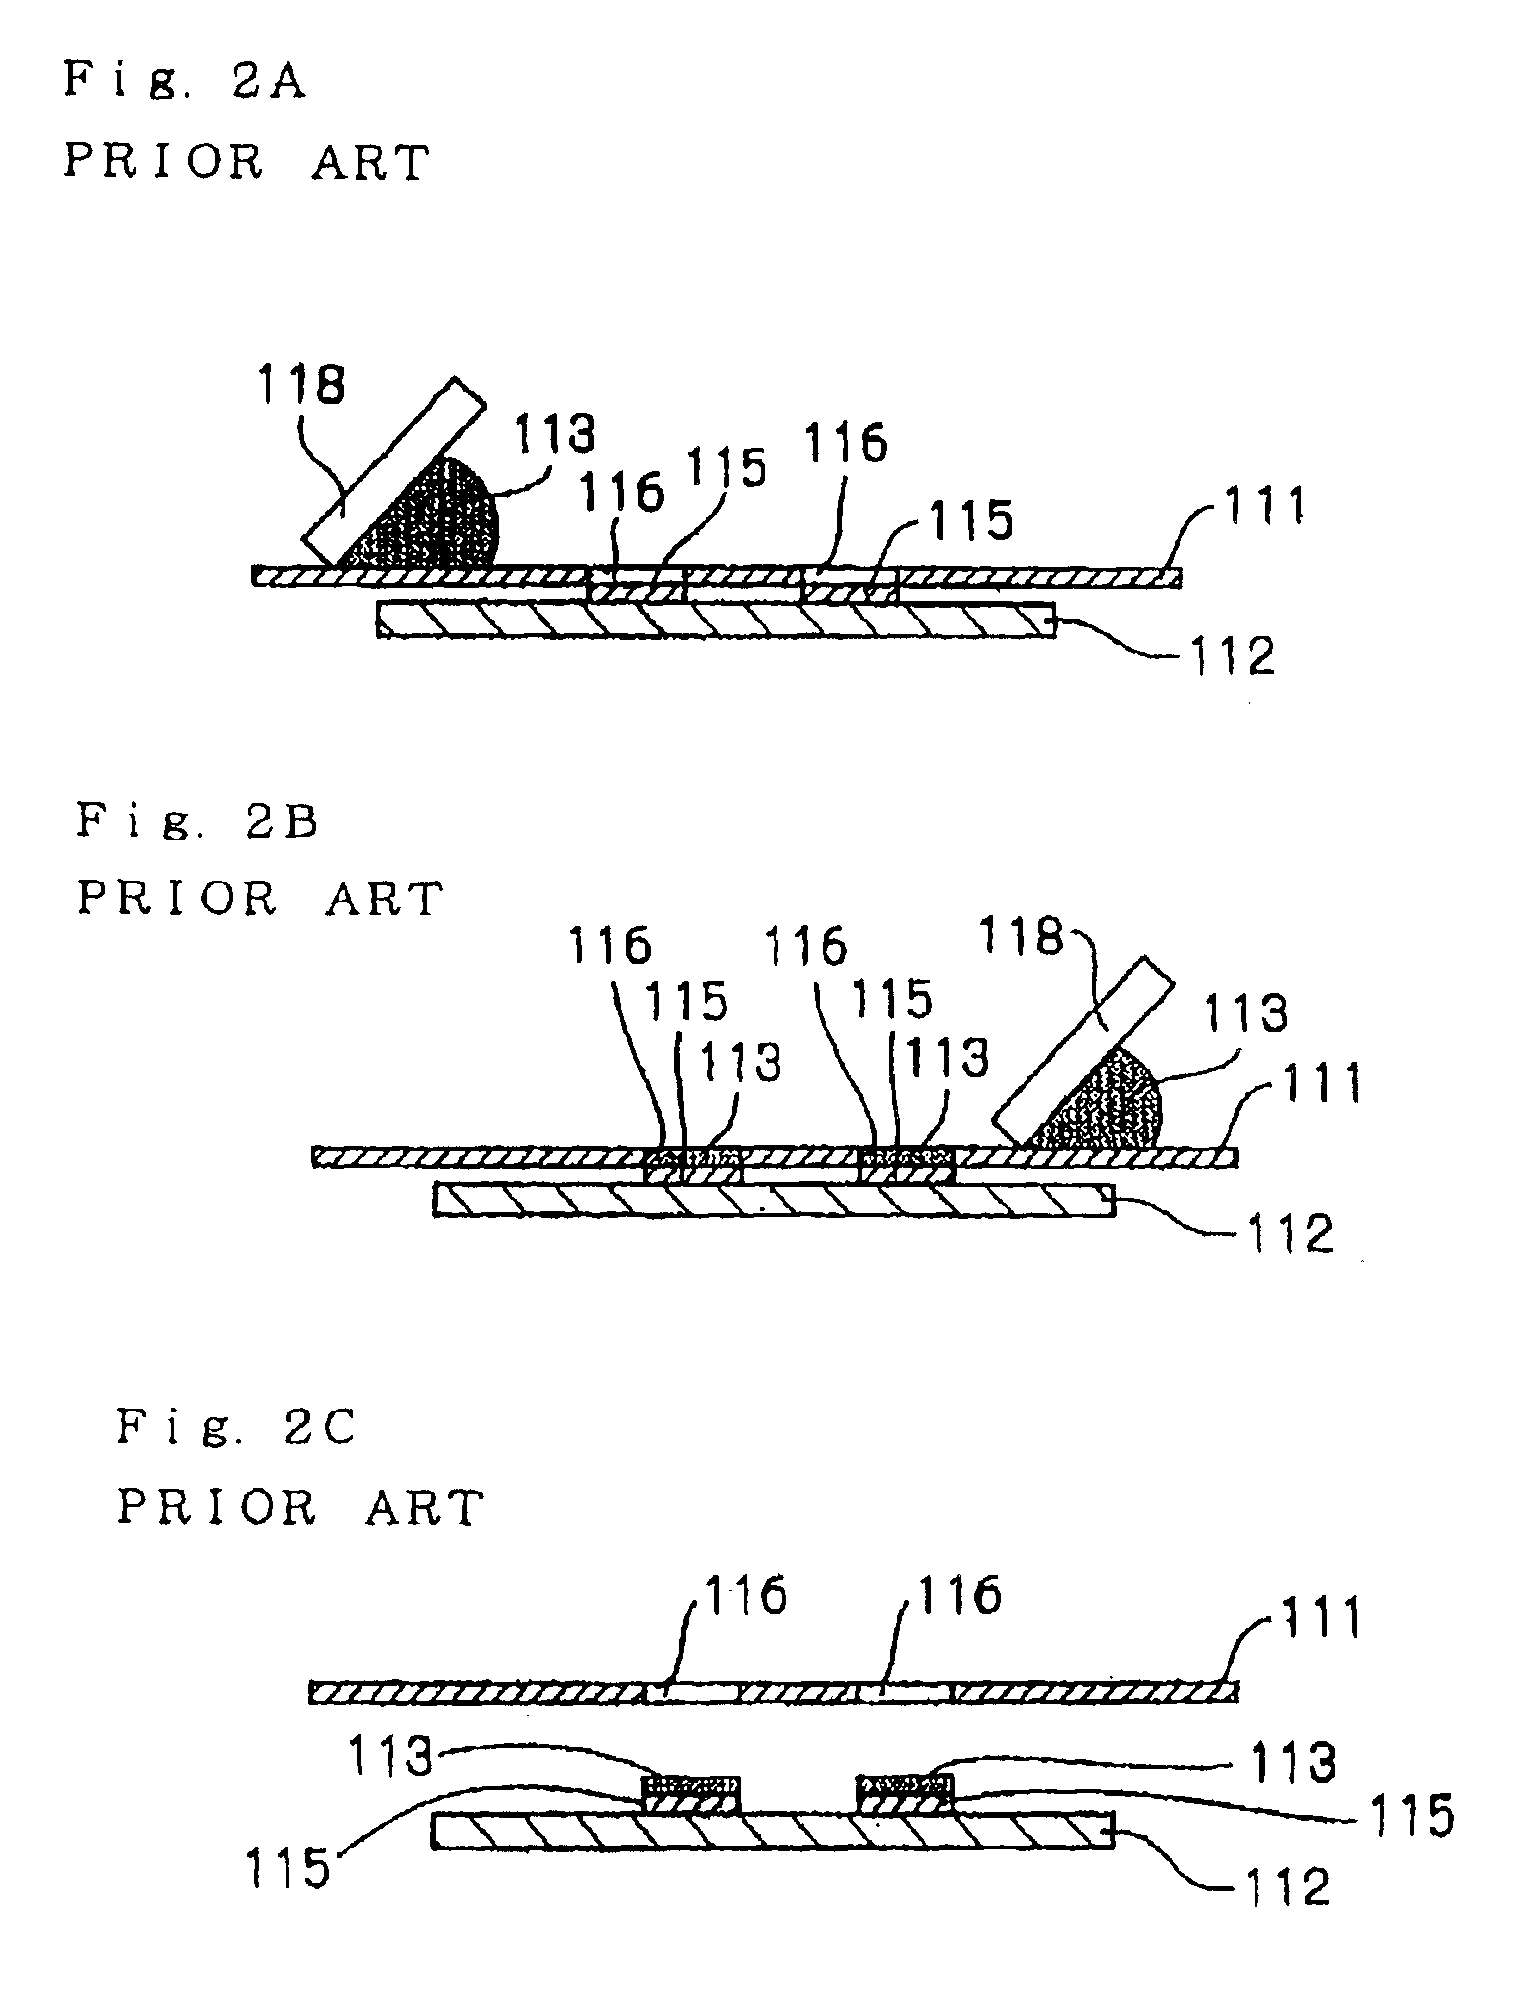 Method and apparatus for printing solder paste of different thickness on lands on printed circuit board